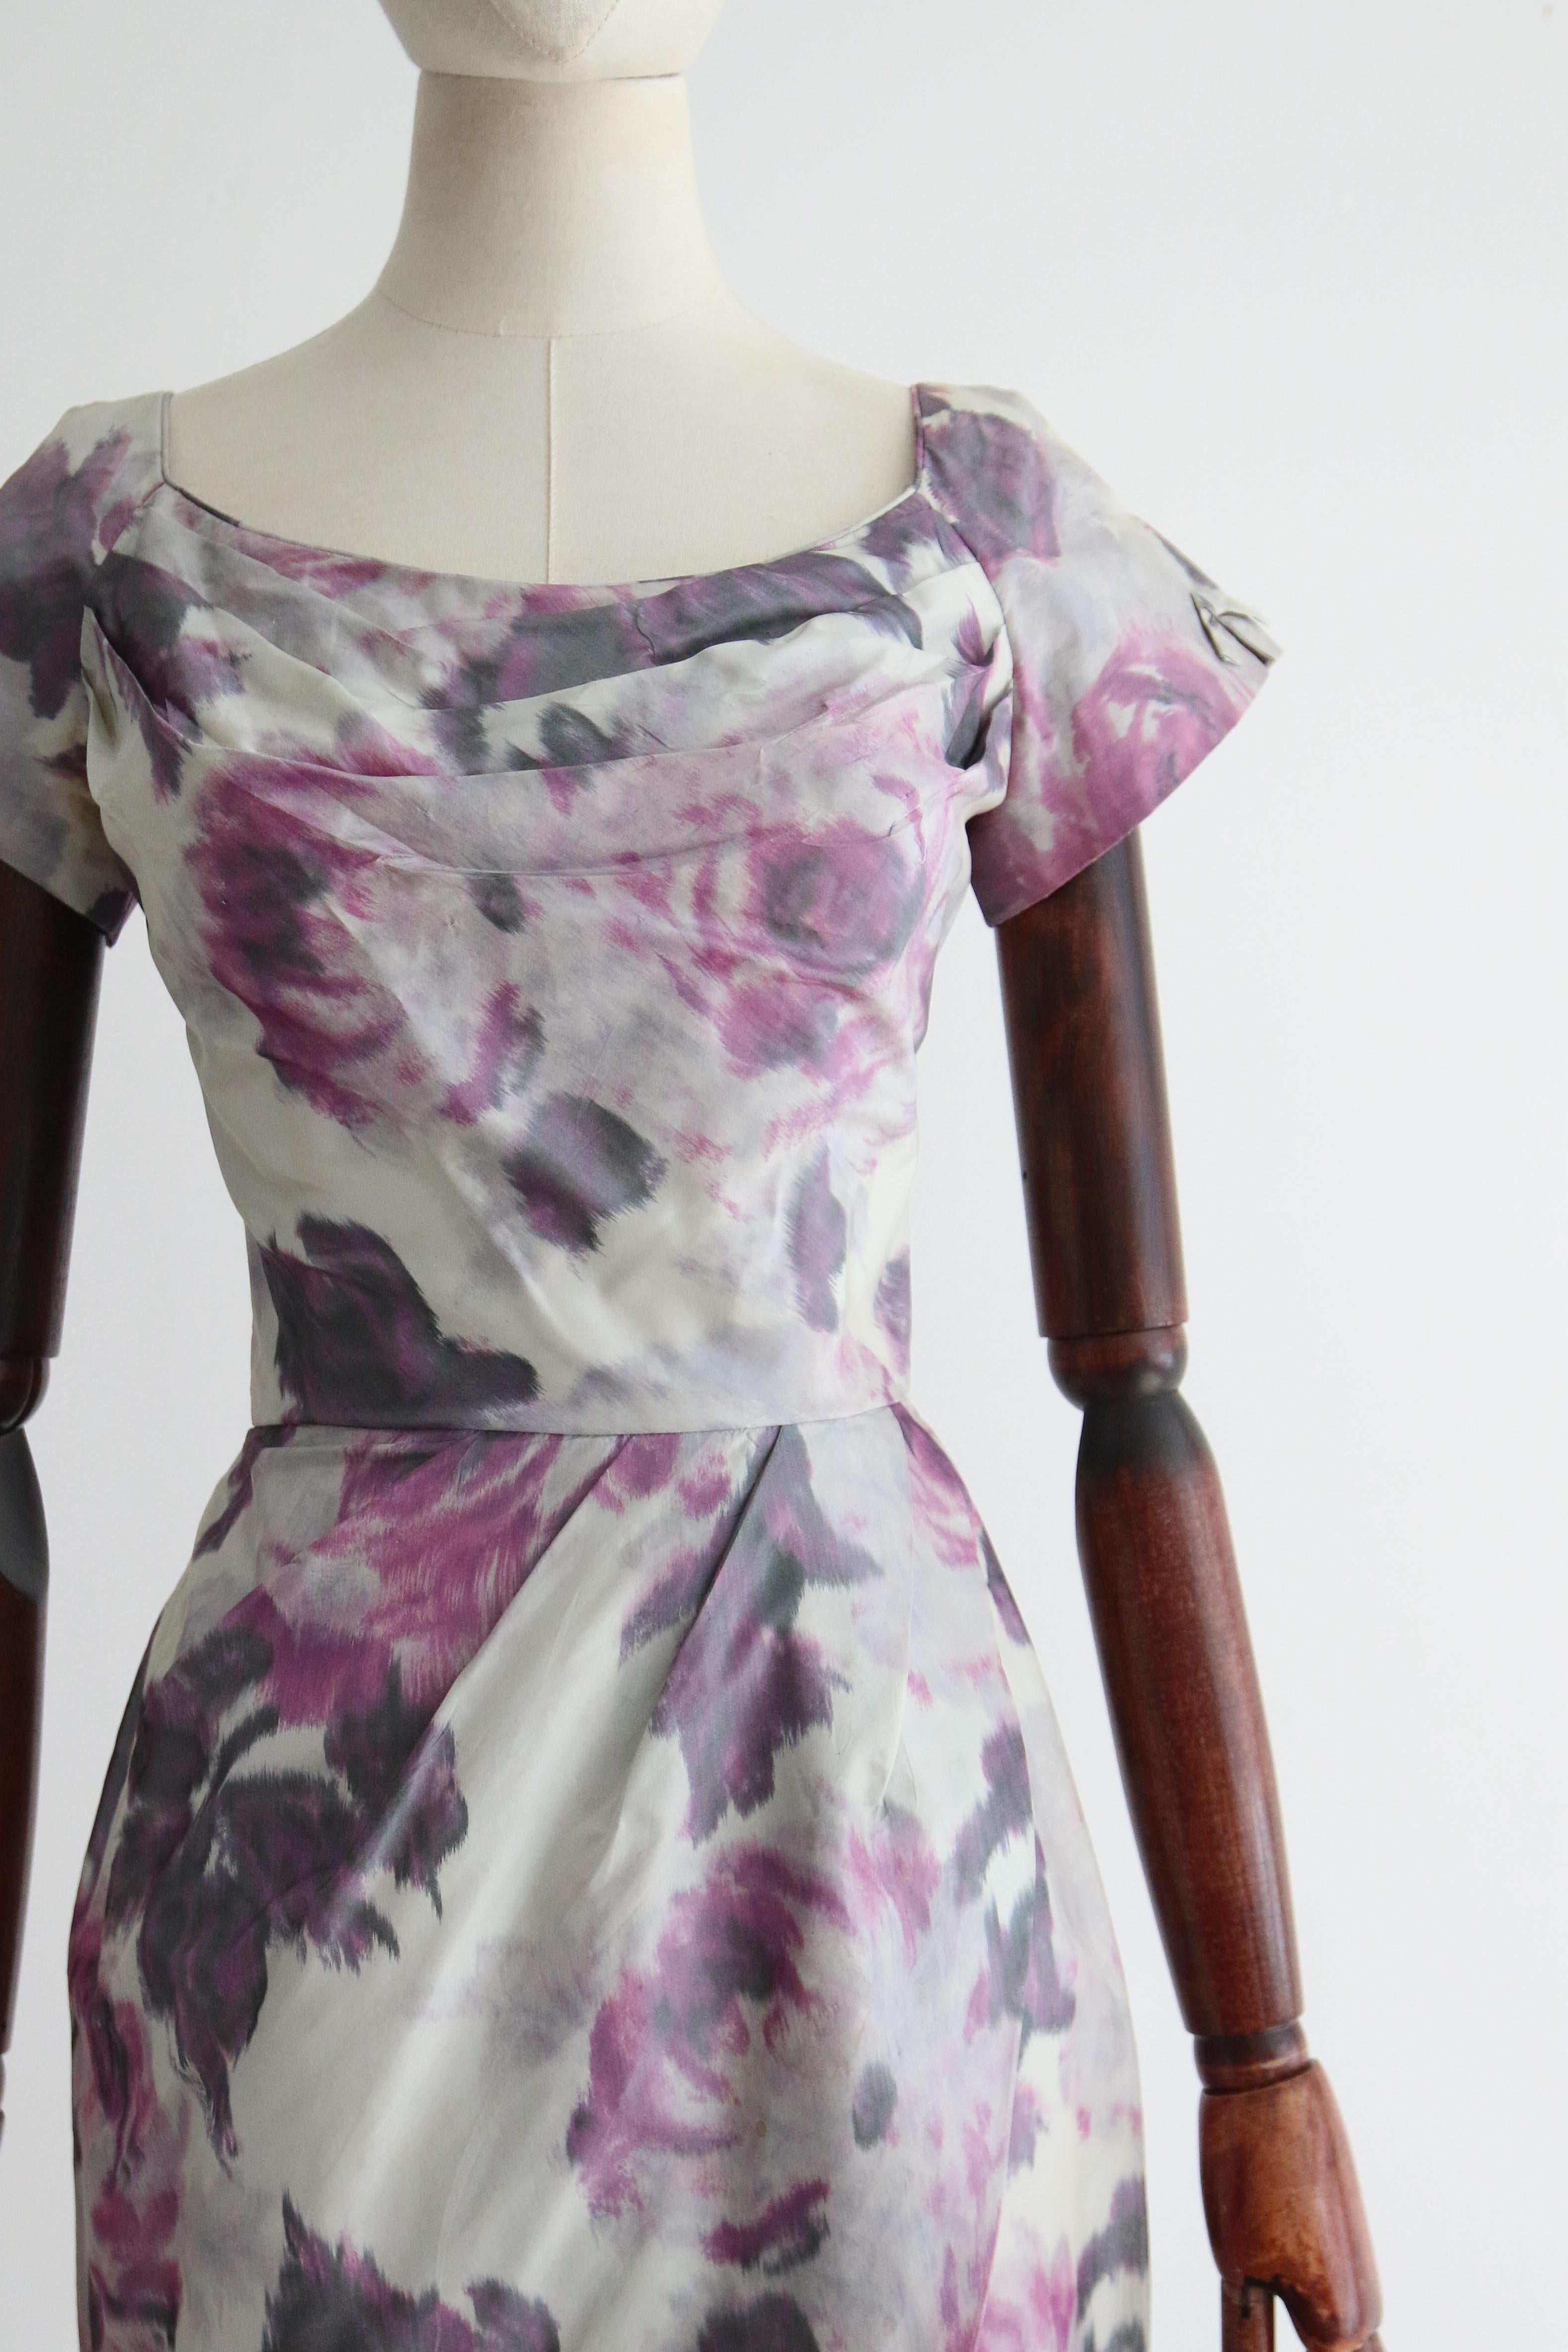 Gray Vintage 1950's Lilac Watersilk Floral Dress UK 8 US 4 For Sale